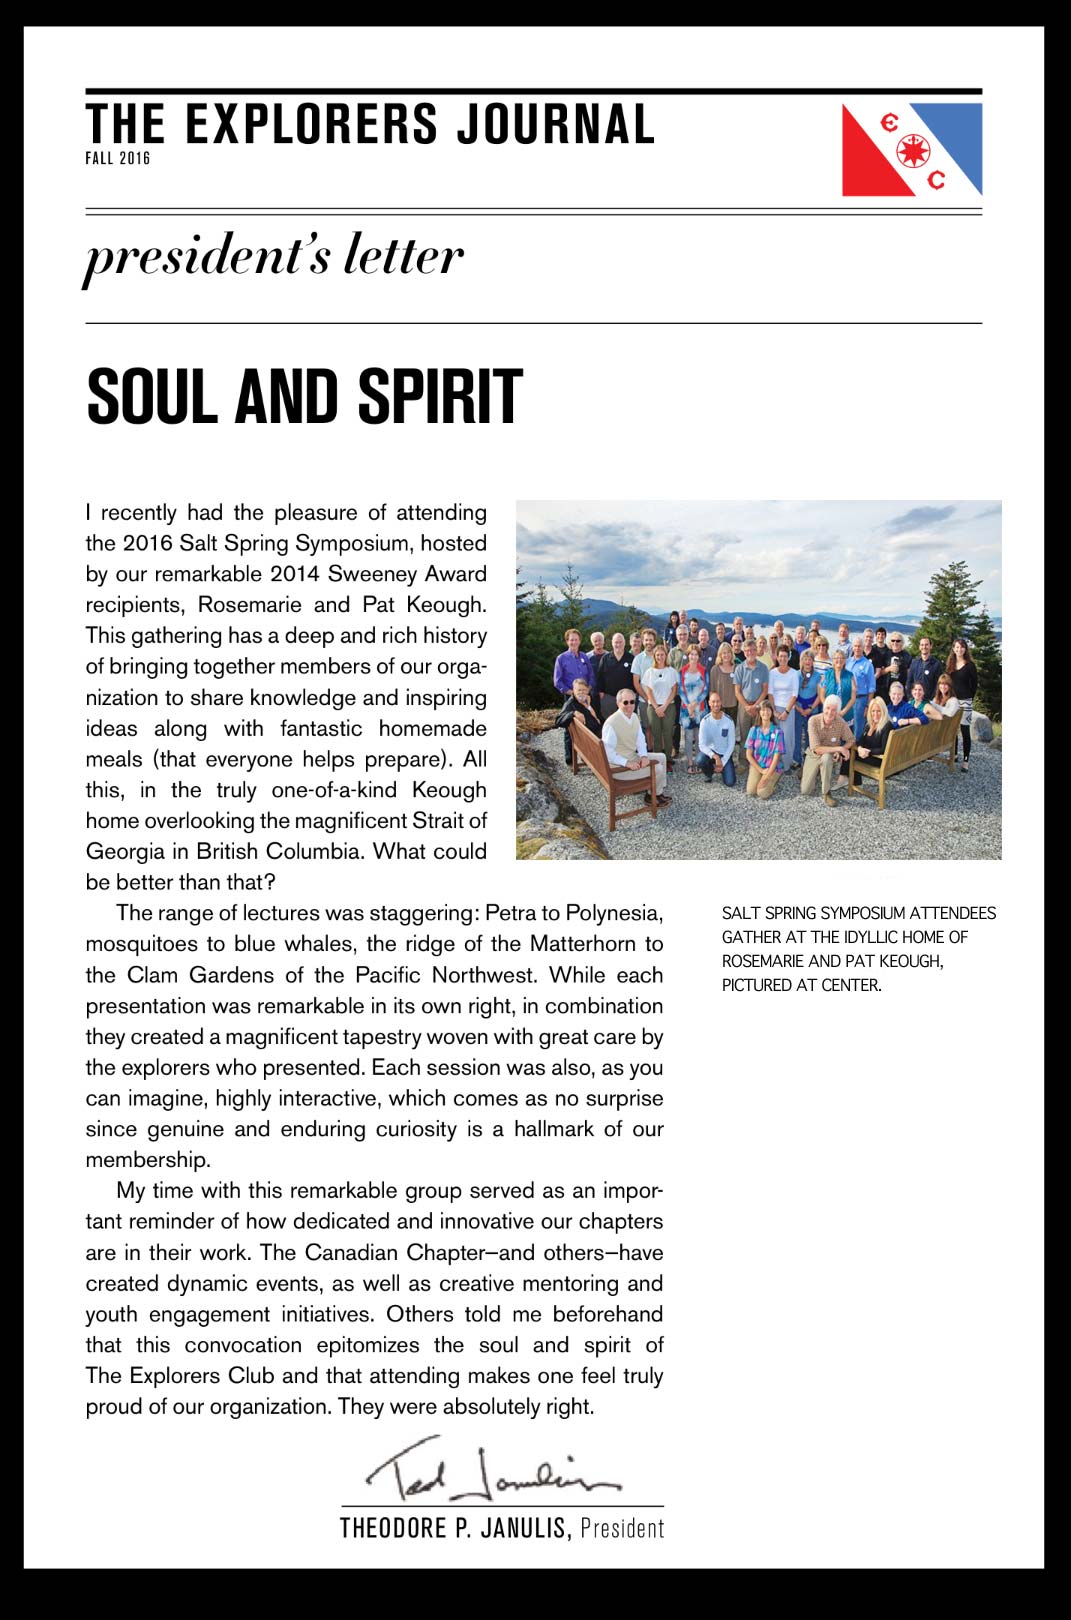 Explorers Journal Ted Janulis writes about the Salt Spring Symposium and Pat & Rosemarie Keough